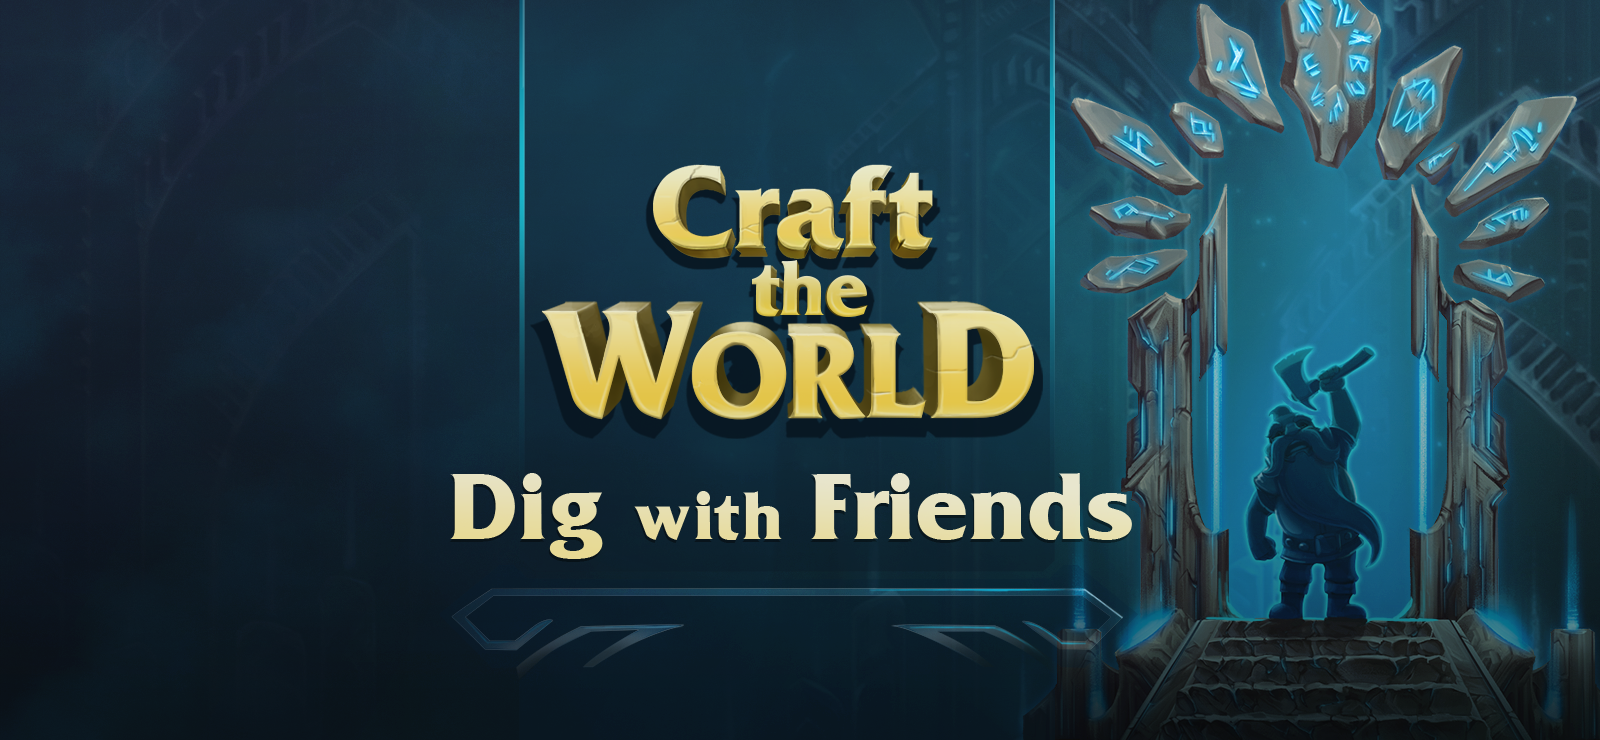 Craft The World - Dig With Friends